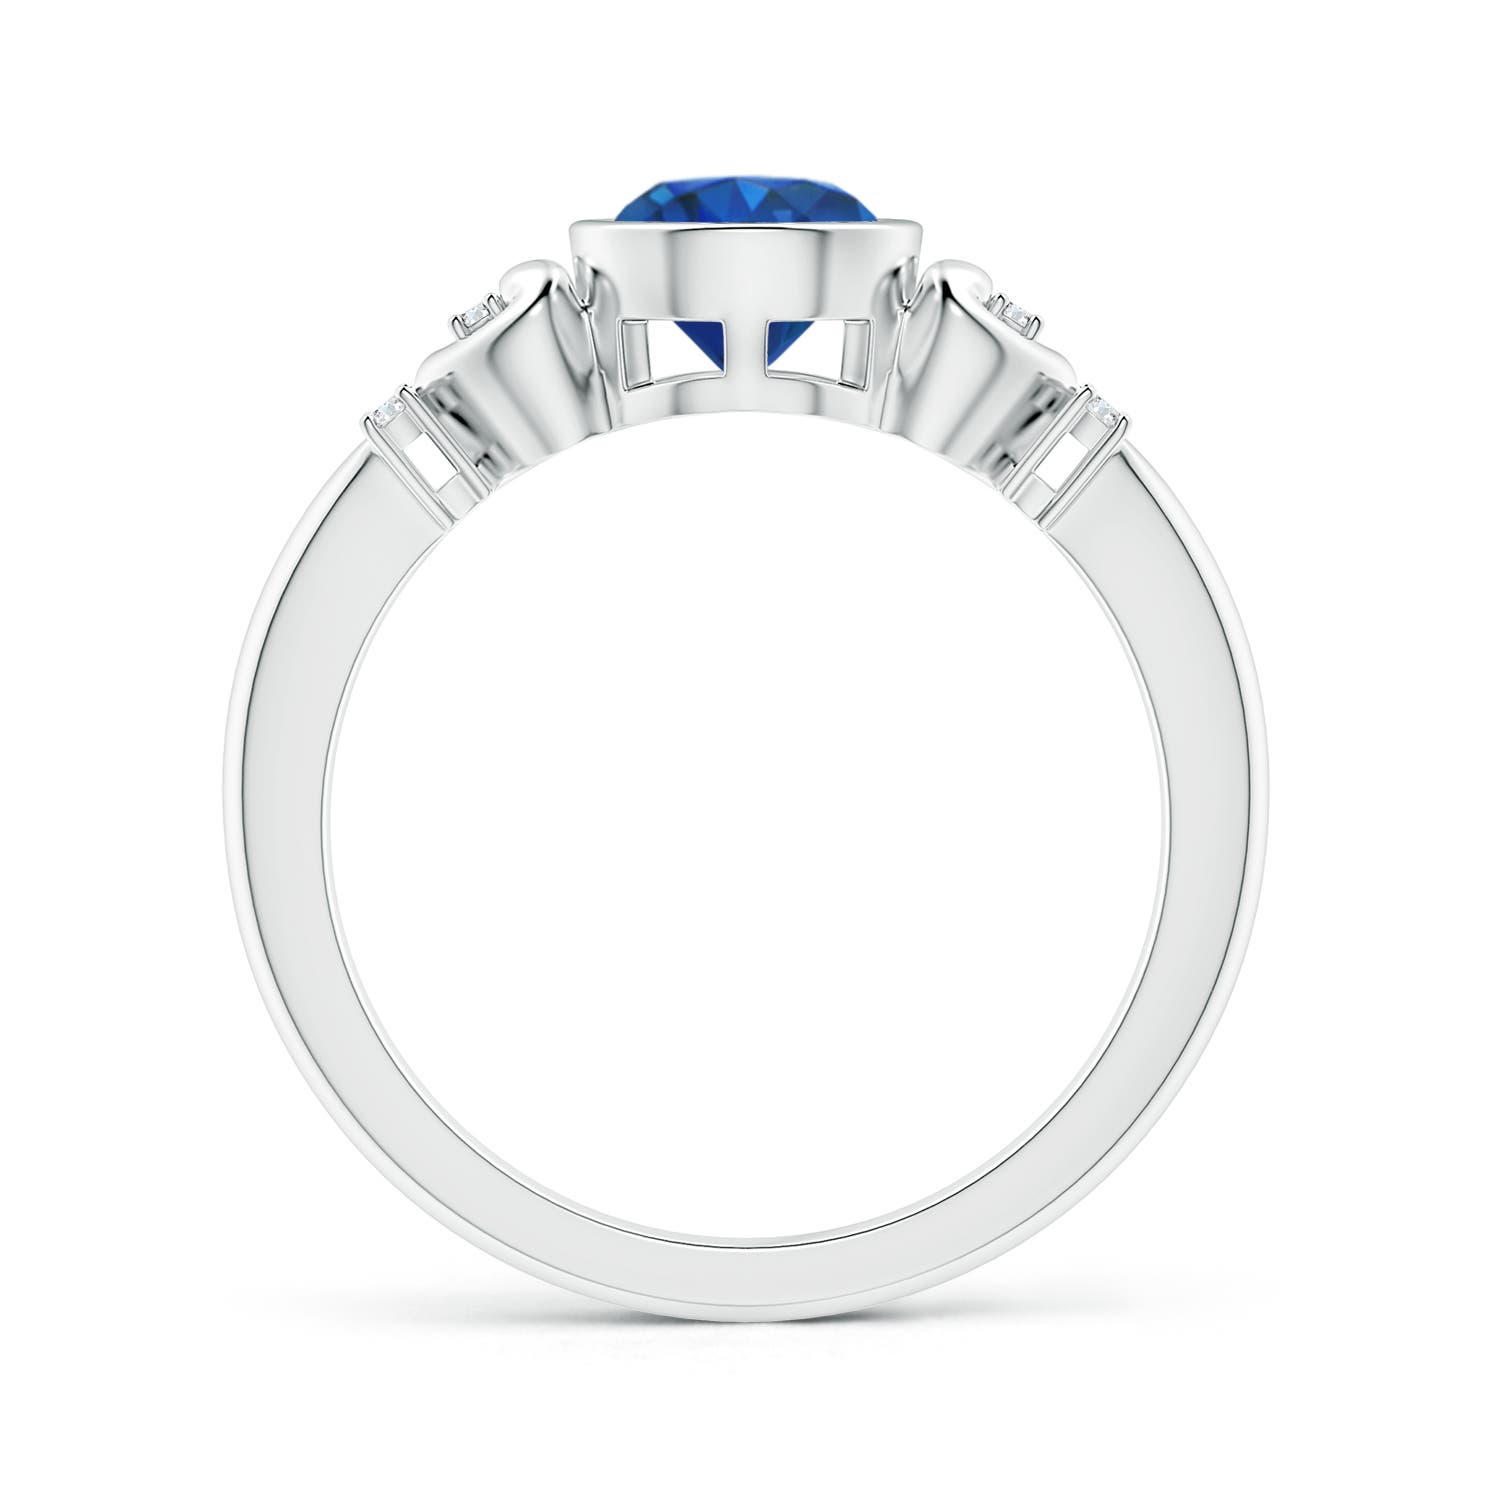 AAA - Blue Sapphire / 1.05 CT / 14 KT White Gold